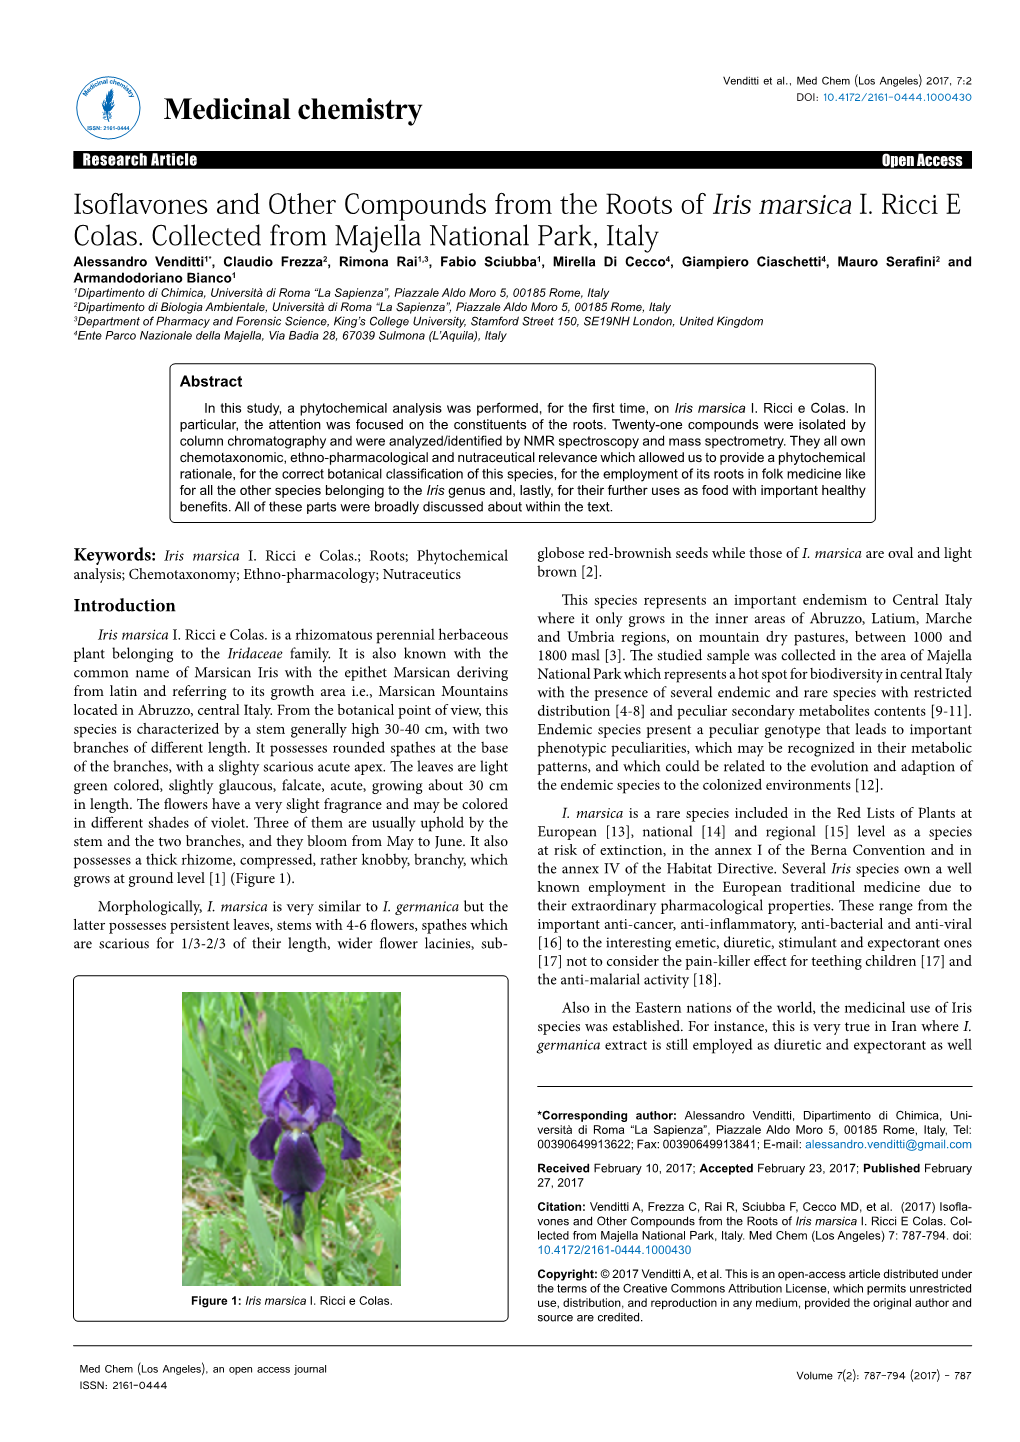 Isoflavones and Other Compounds from the Roots of Iris Marsica I